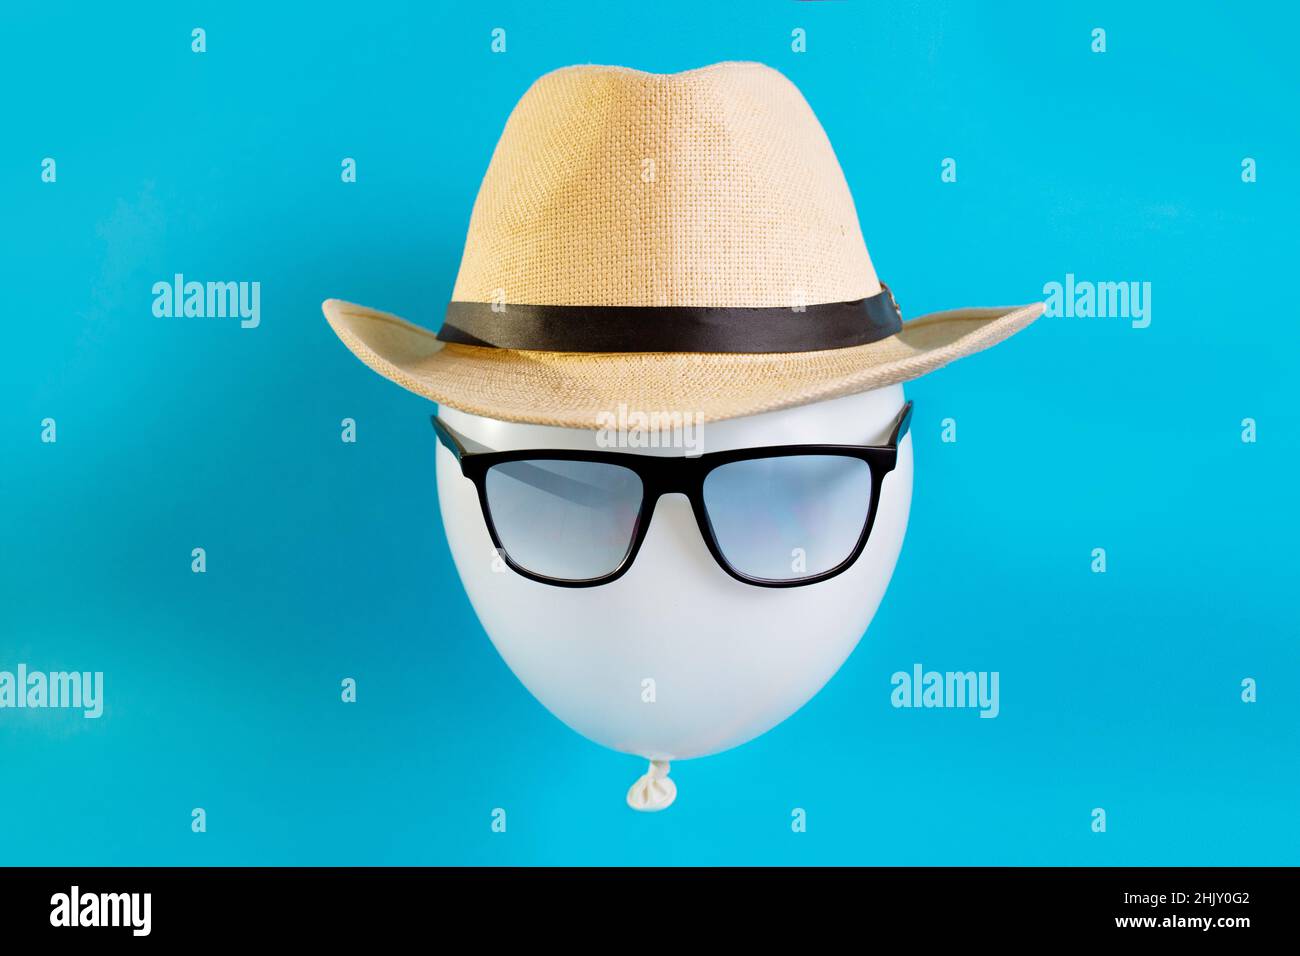 Balloon tourist close-up. The image of a male traveler in a hat and sunglasses concept tourist destination Stock Photo